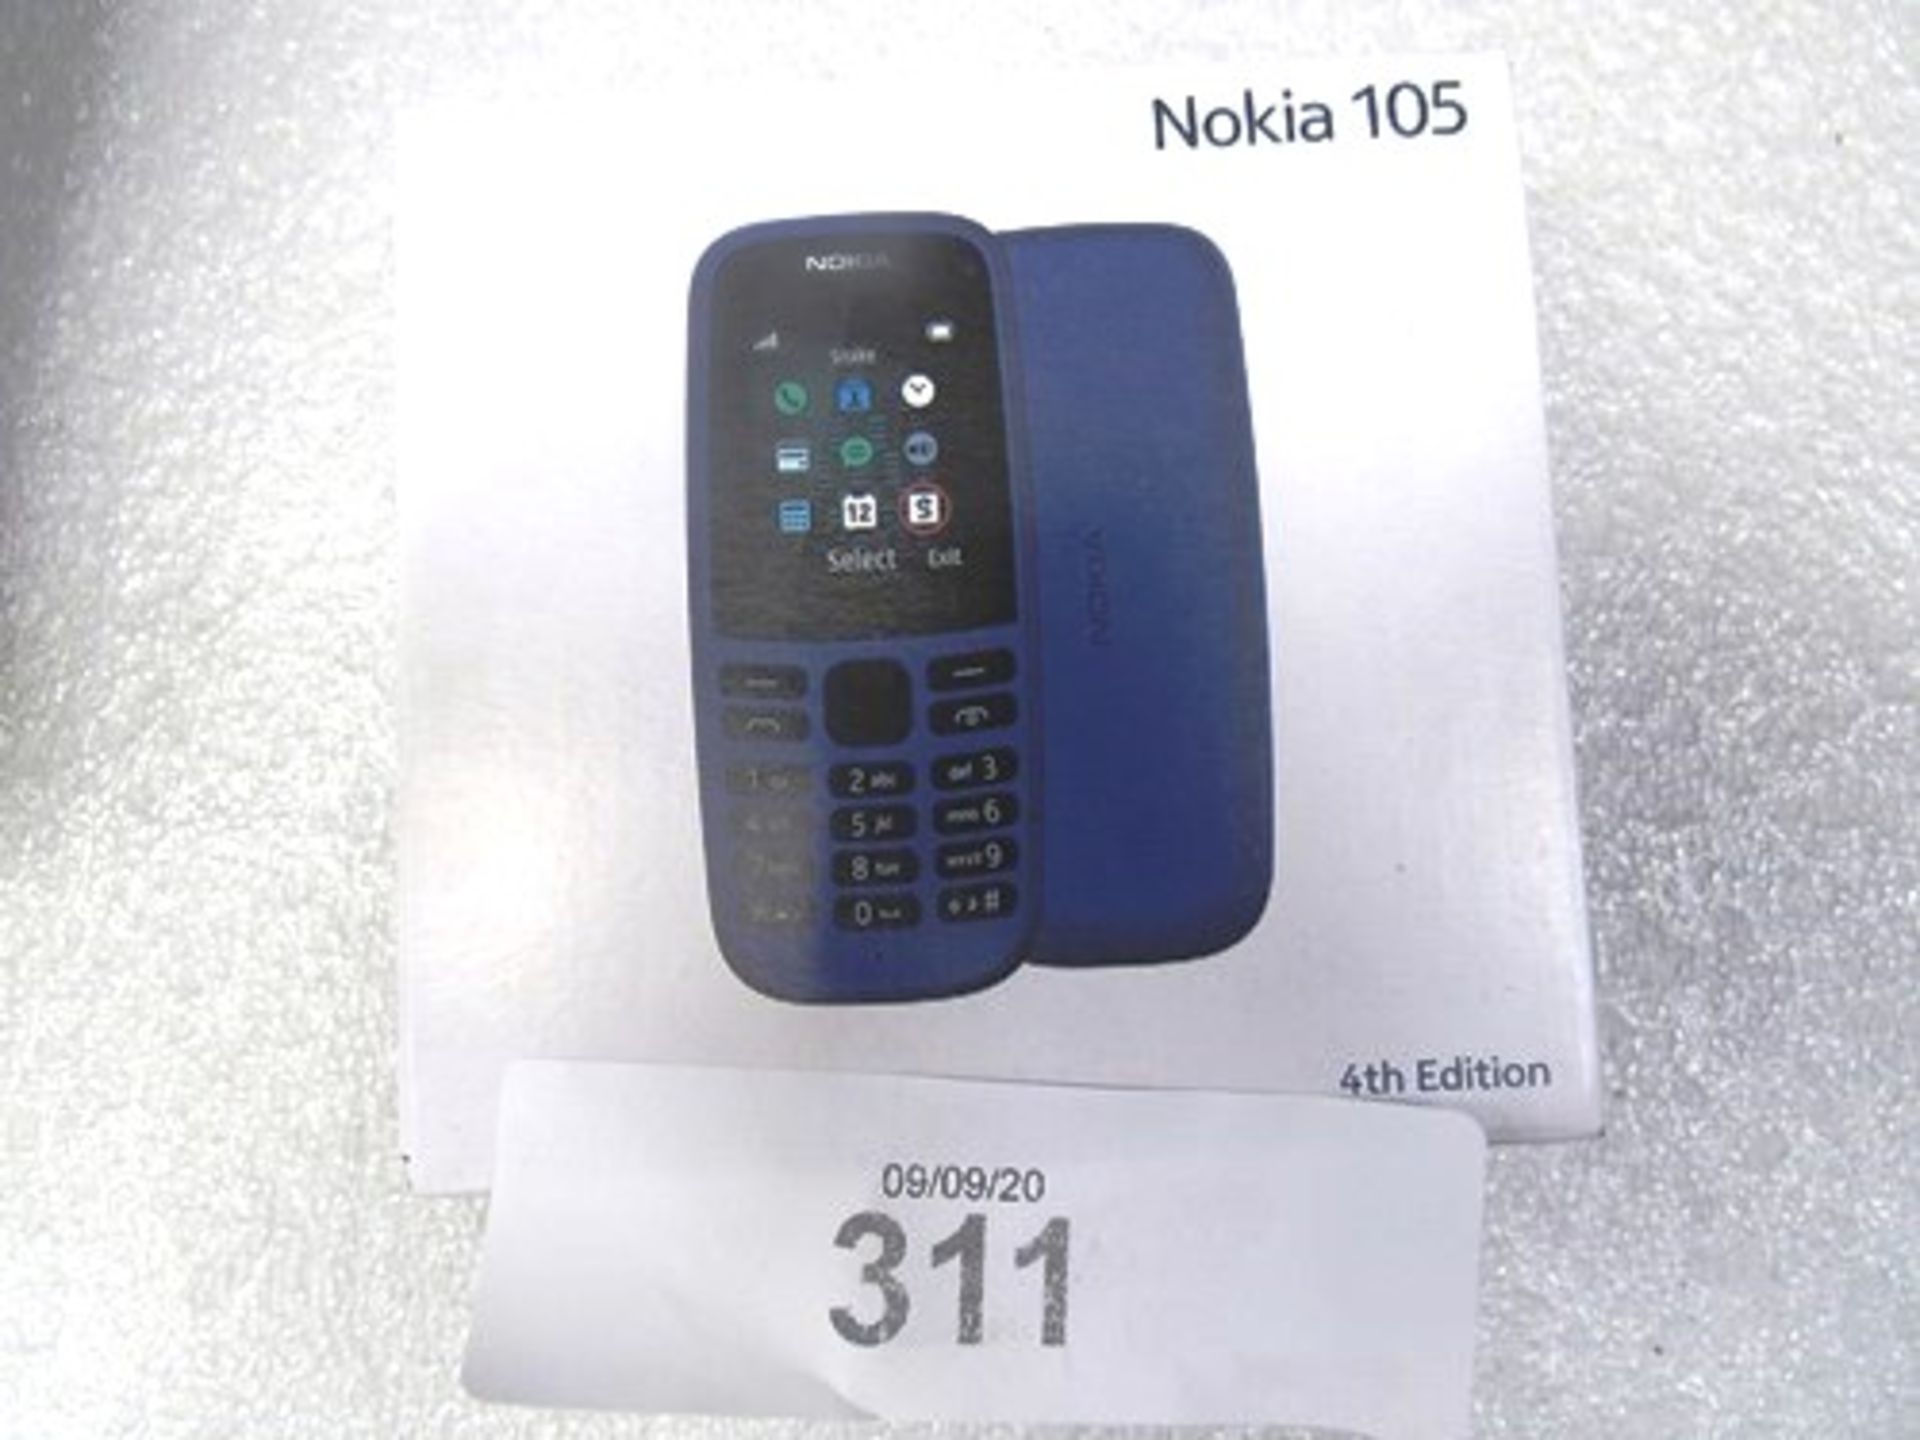 10 x Nokia 105 black phones, model 16KIGBO1A14 TA-1203 S5 - Sealed new in box. These phones have not - Image 2 of 3